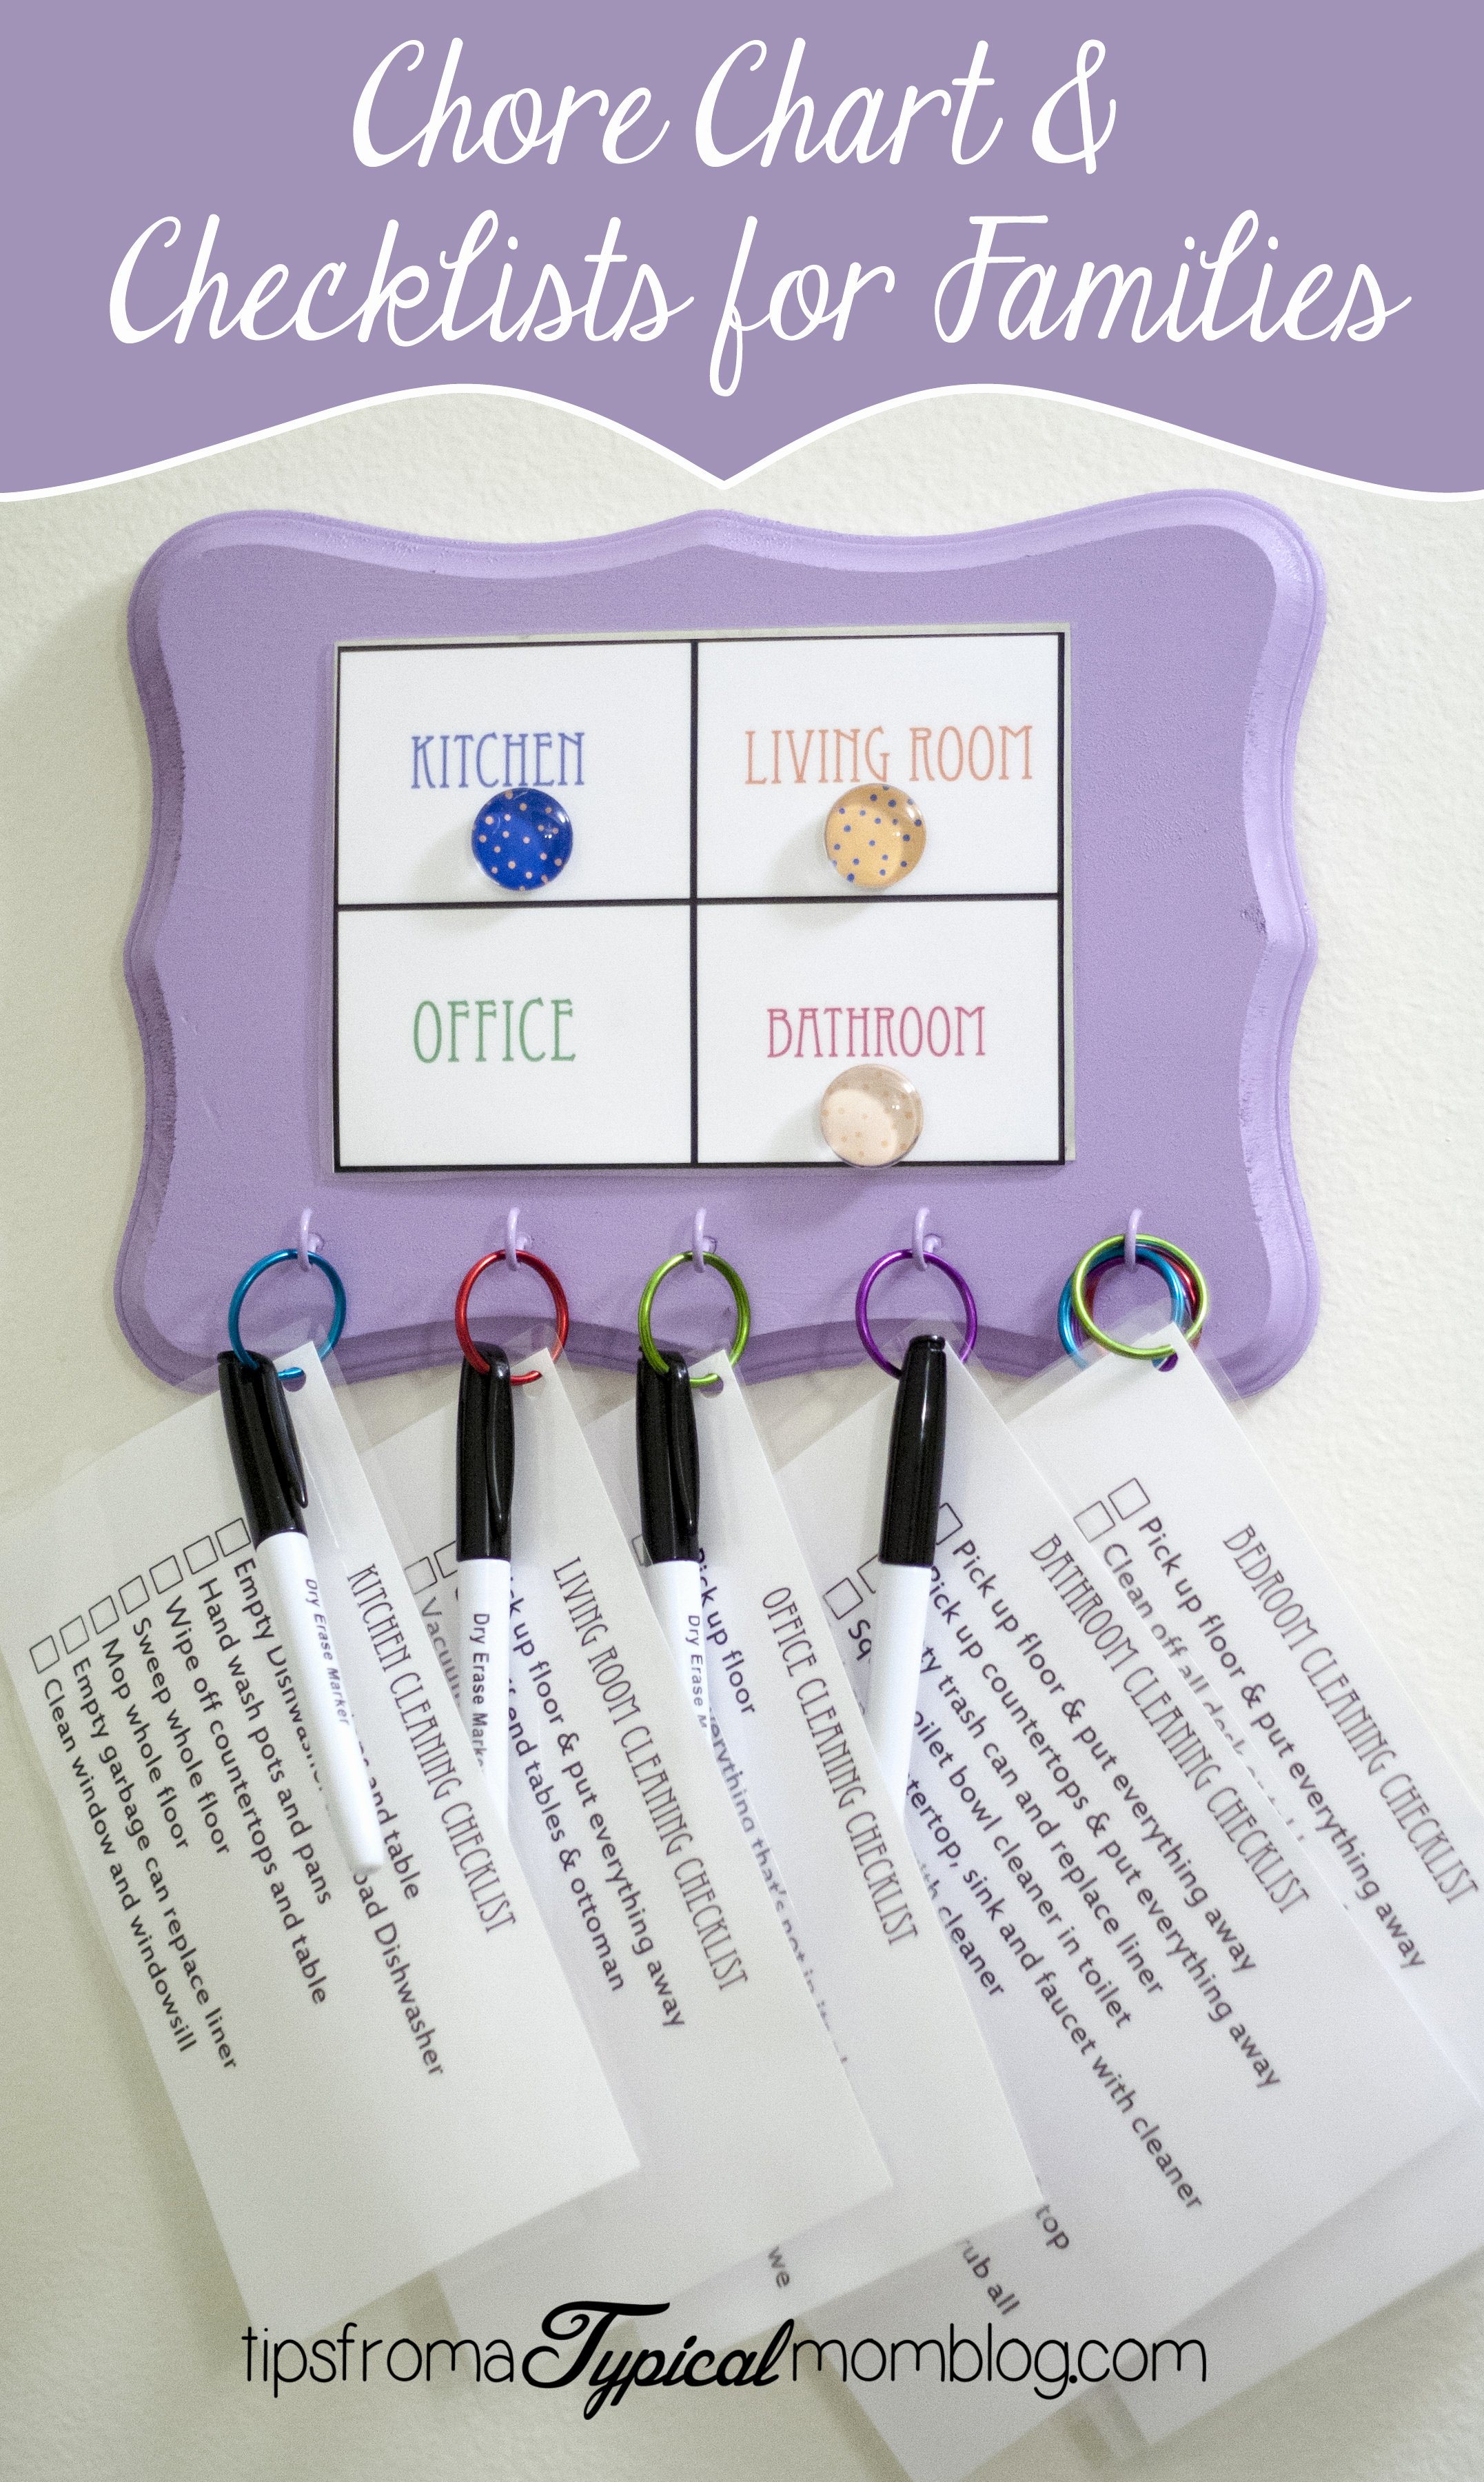 Rotating Chore Chart Template New Free Rotating Chore Chart and Chore Checklist for Kids